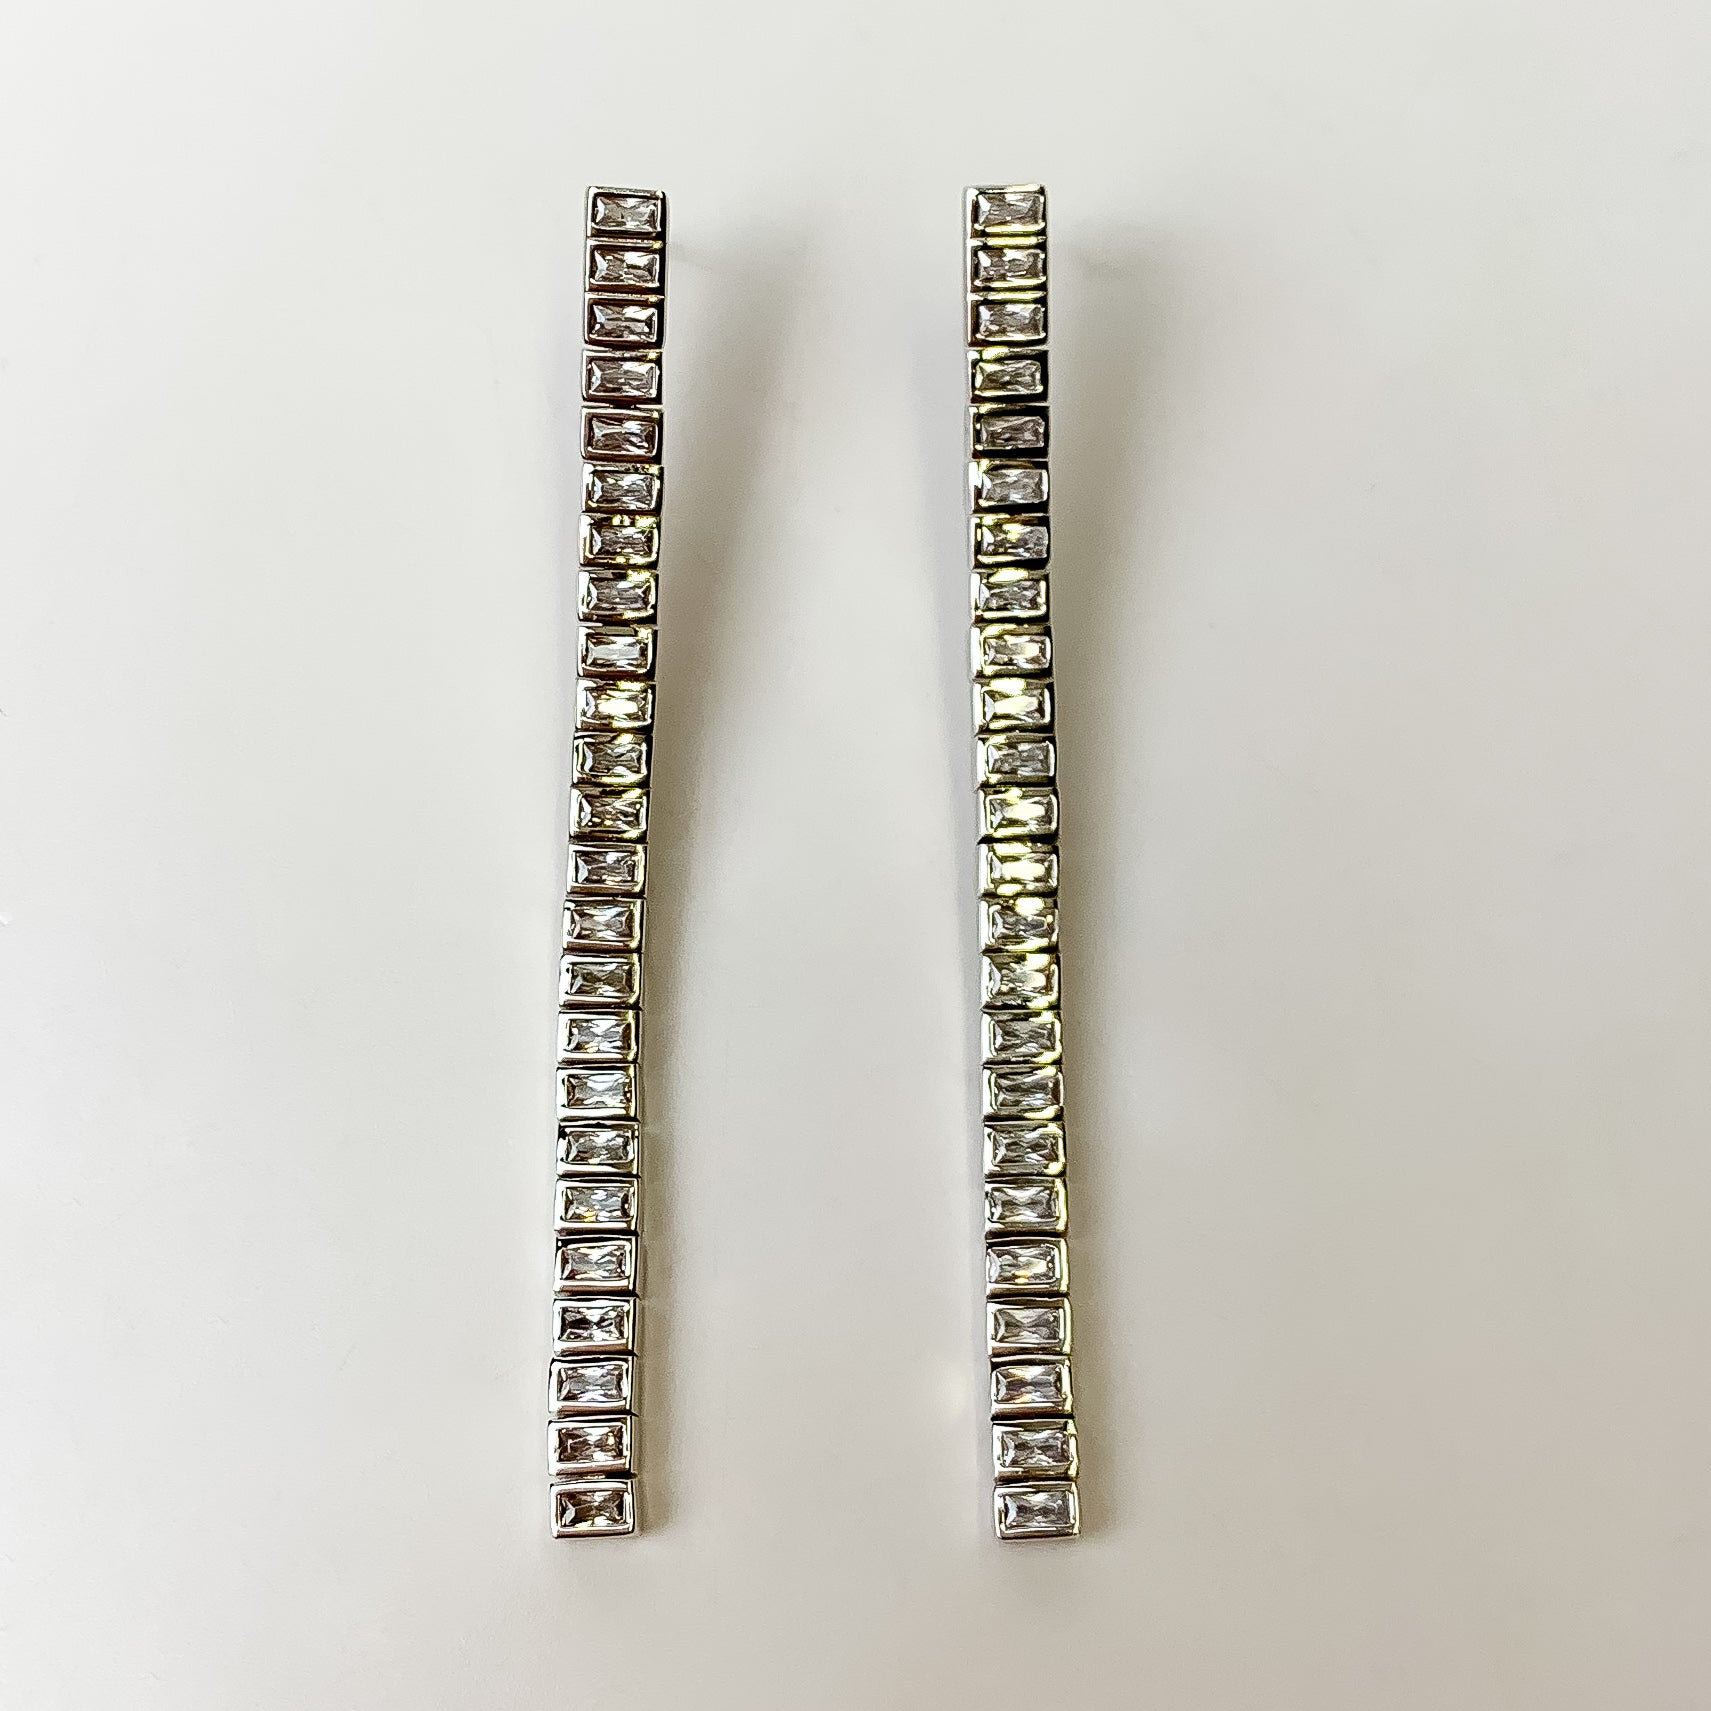 These Gracie long Silver Tennis Linear Earrings in White by Kendra Scott are pictured on a white background.